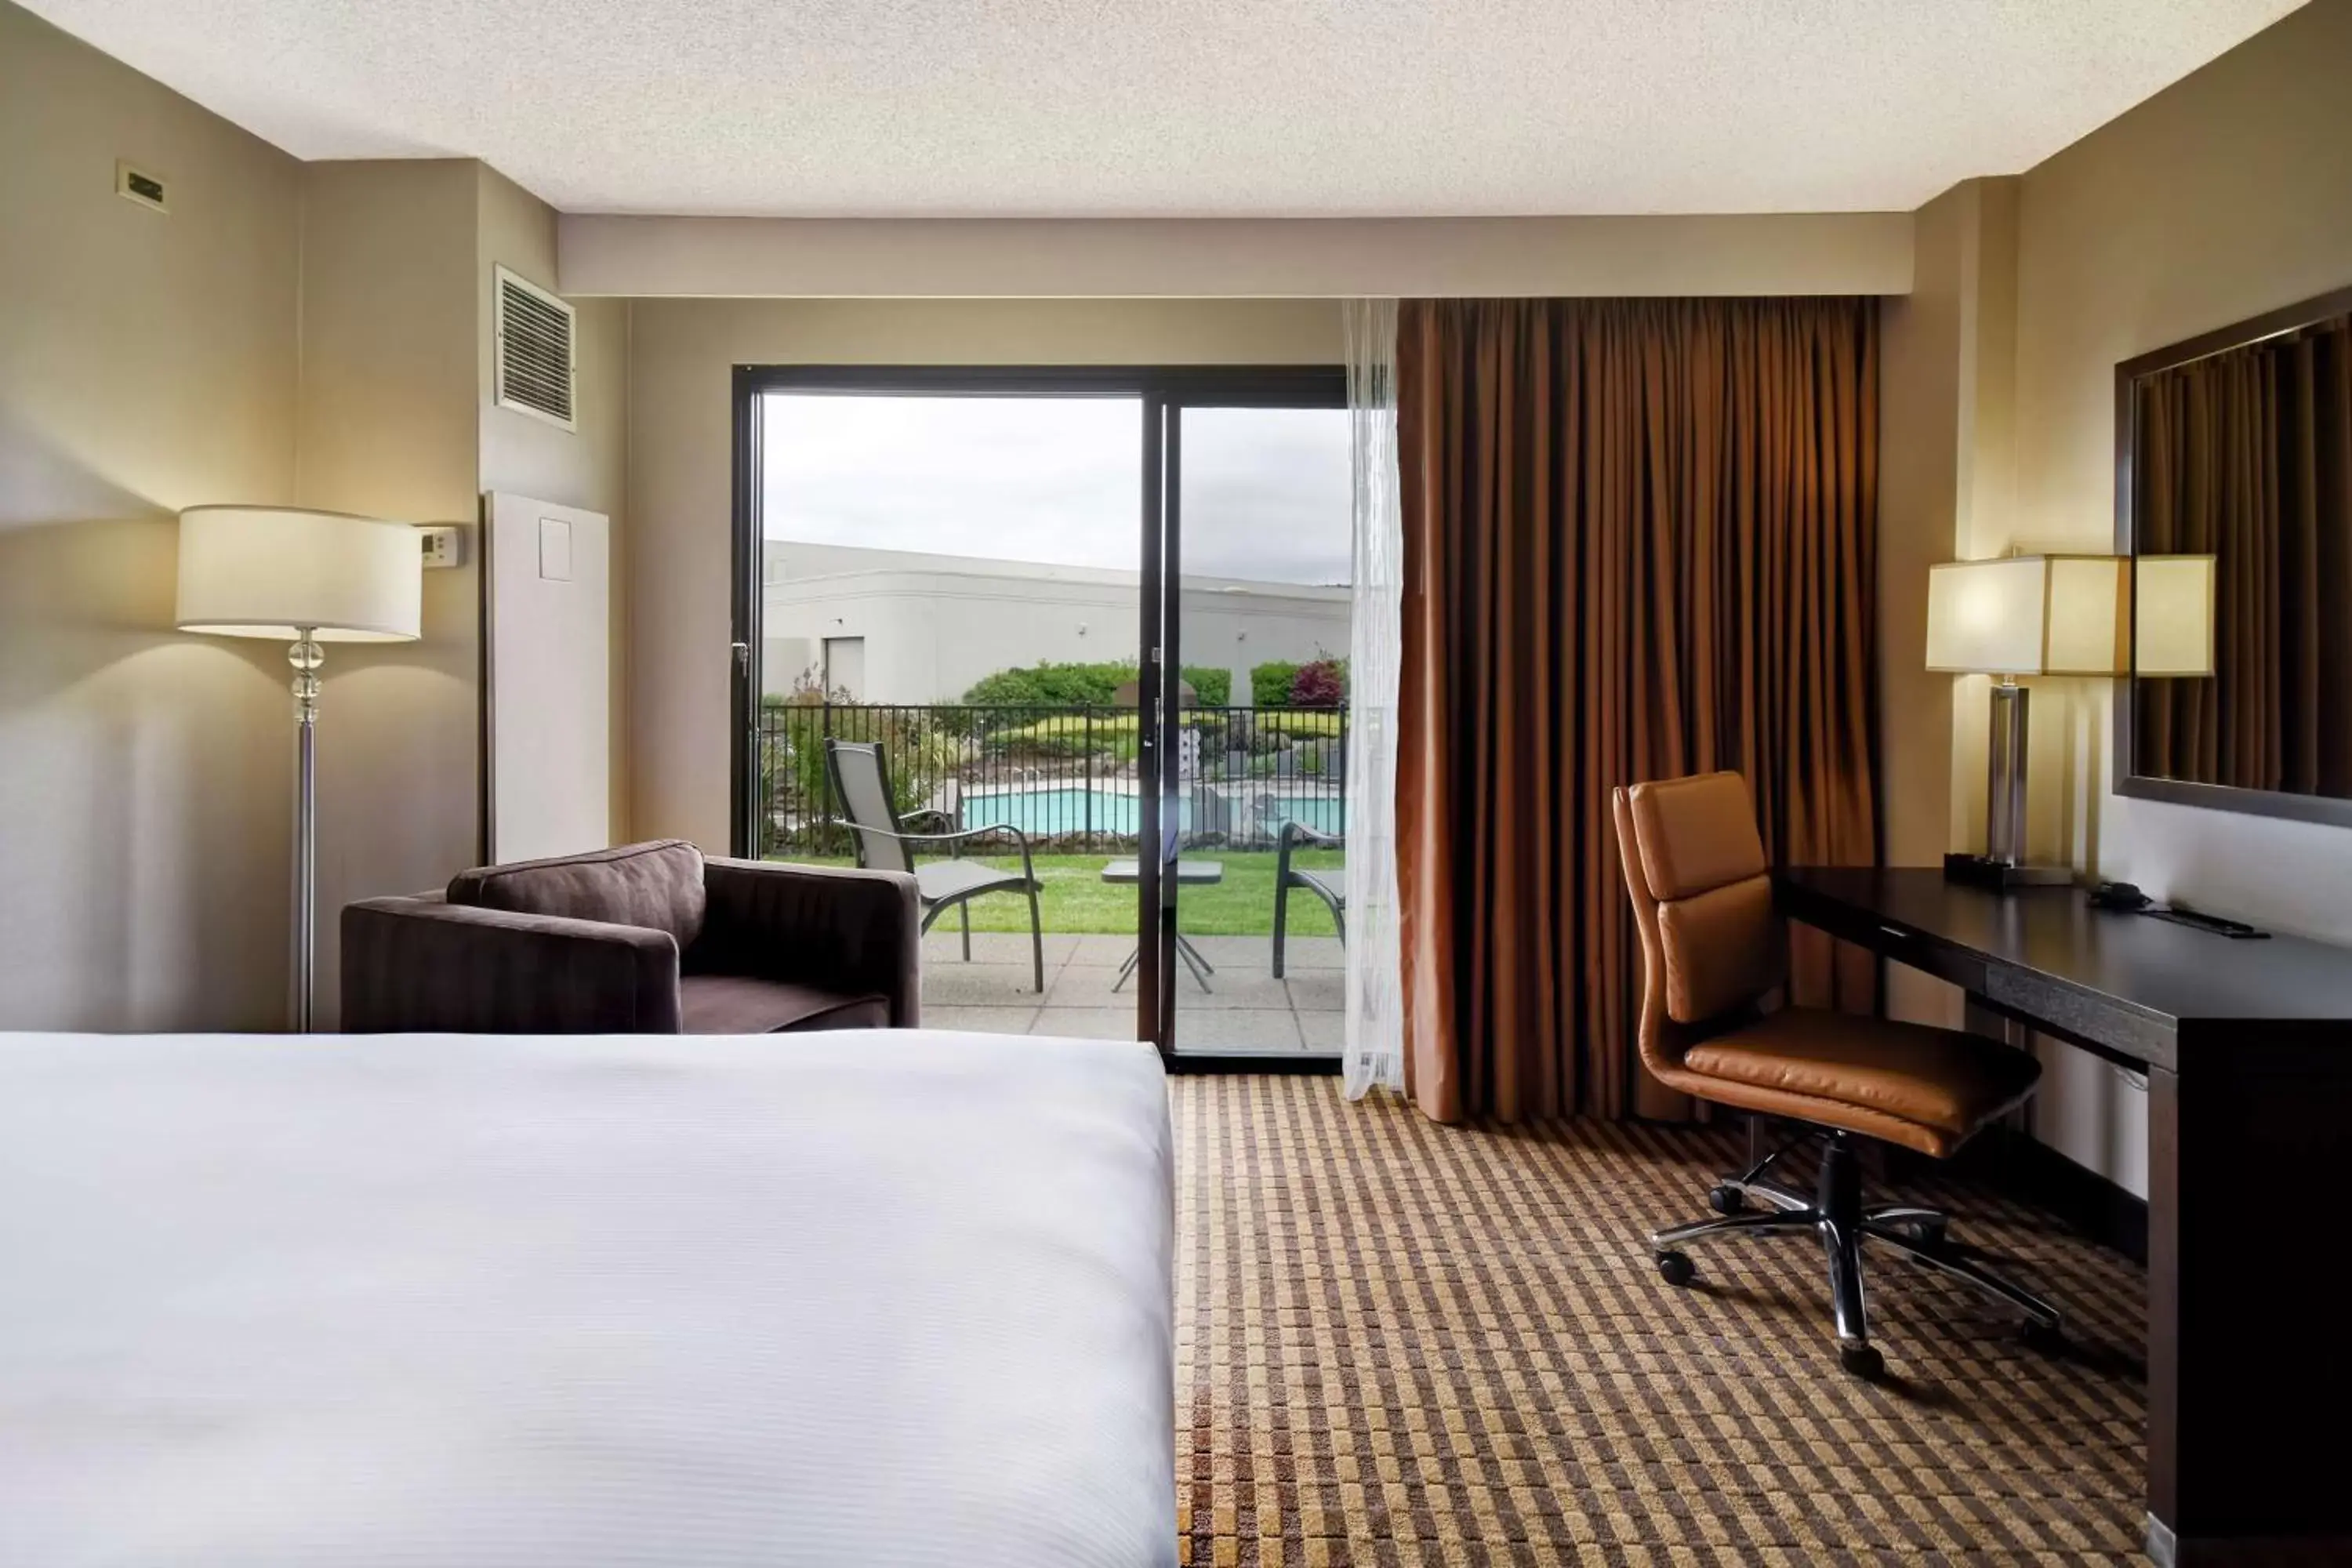 Bedroom in DoubleTree by Hilton Pleasanton at The Club